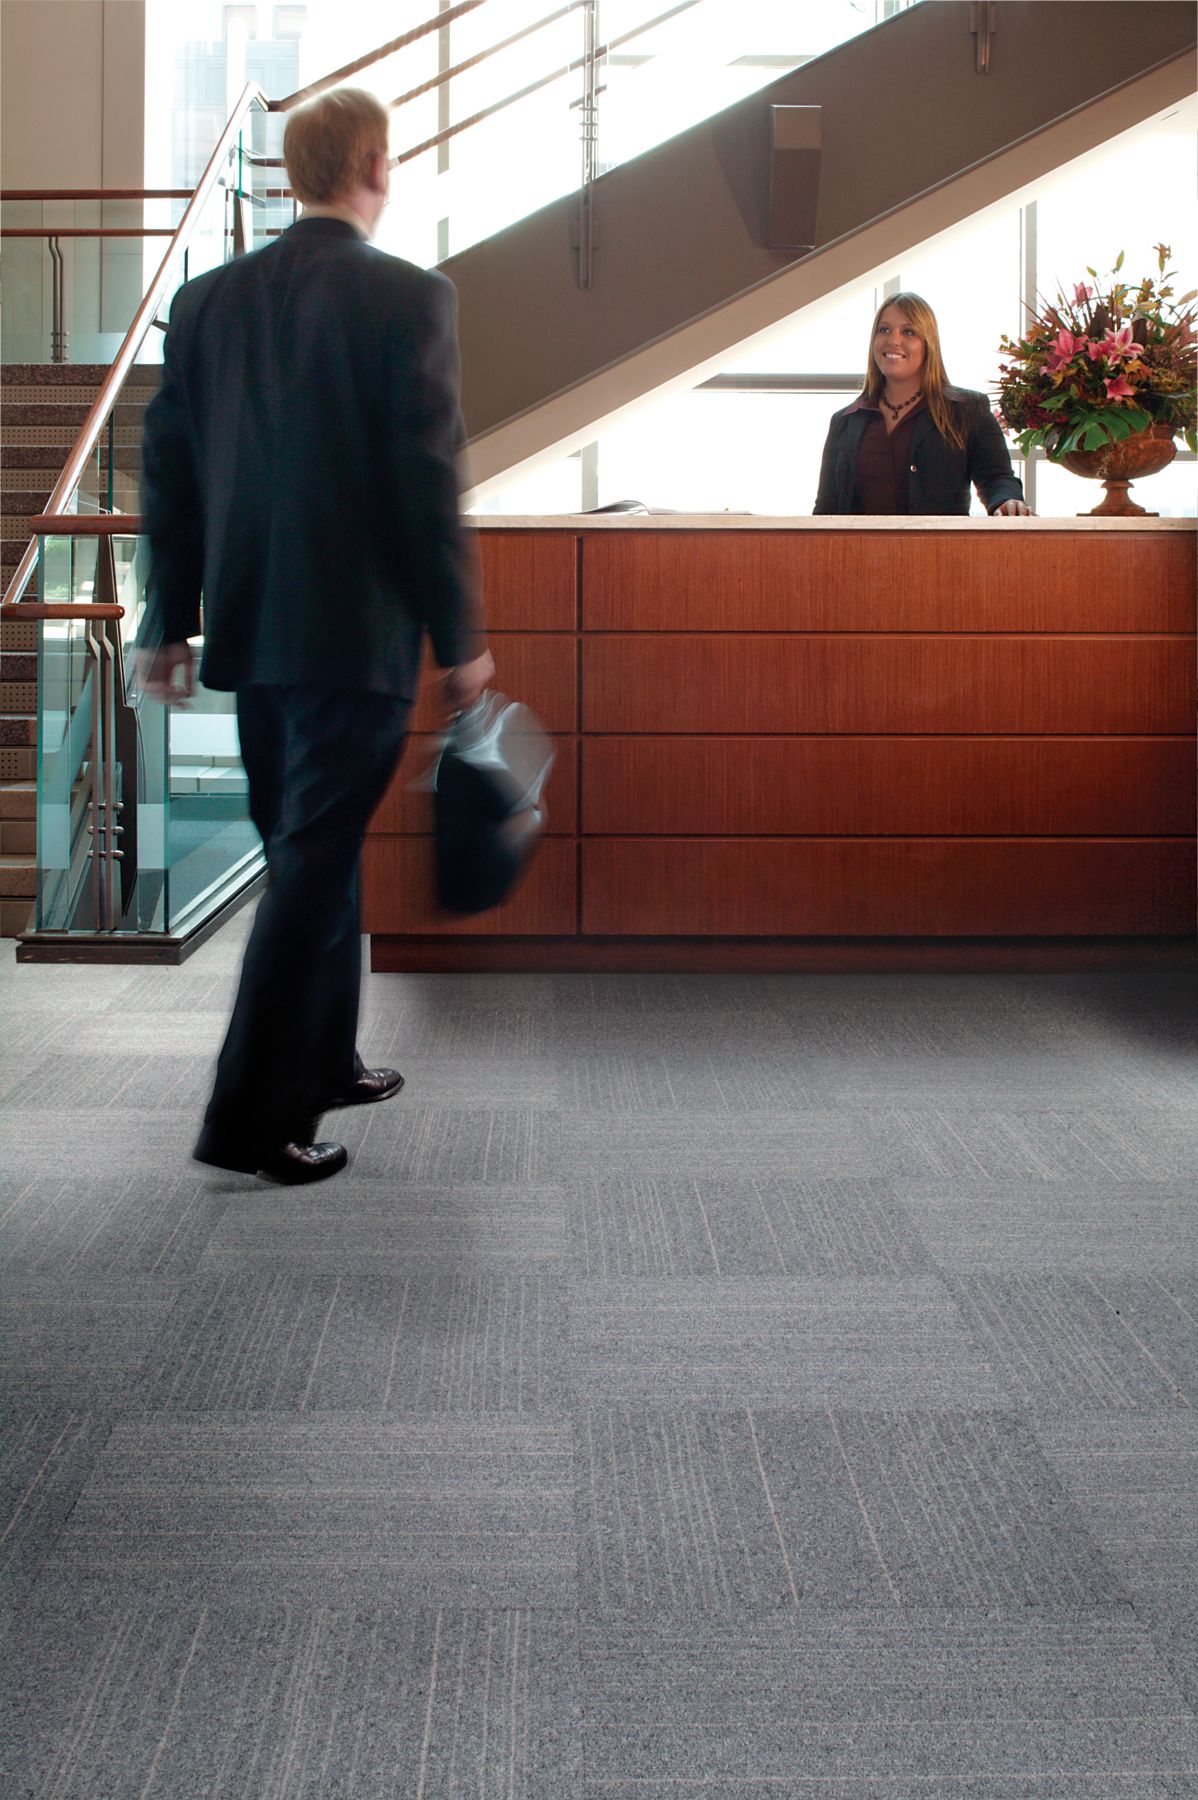 interface Flannel carpet tile in office reception area with man and woman imagen número 2